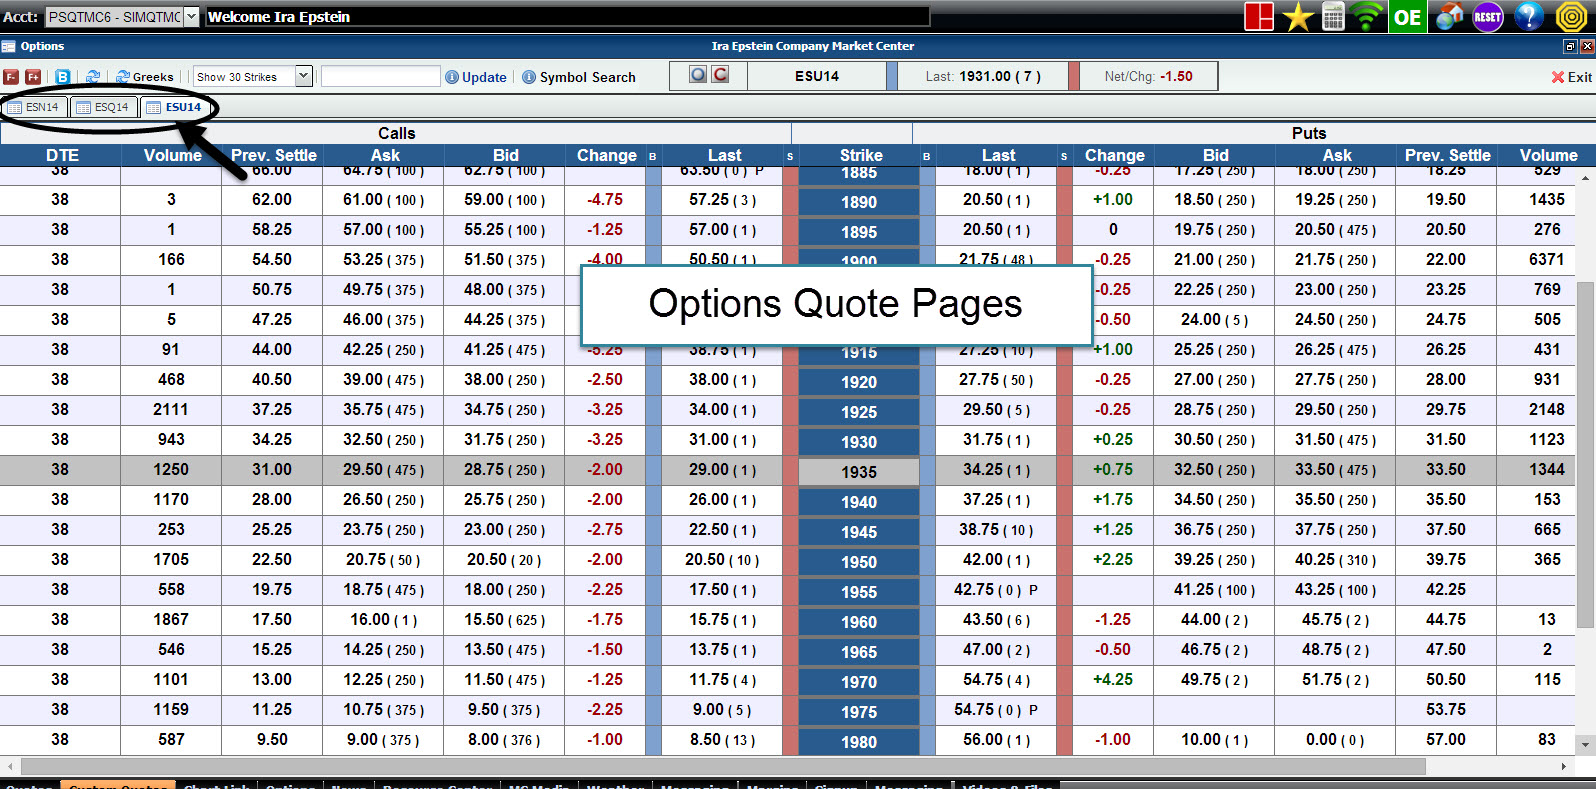 Options Quote Pages